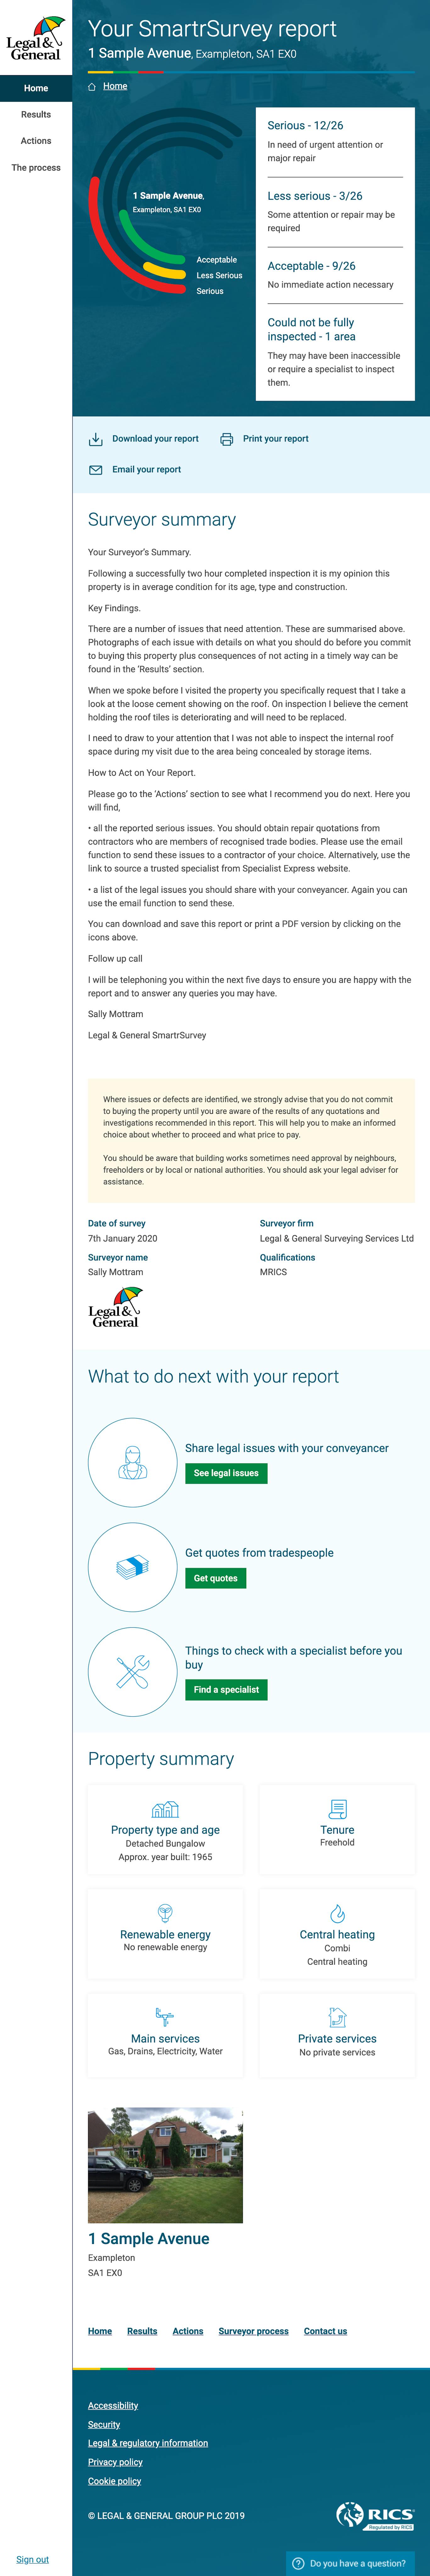 A screenshot of the Smartr Survey report homepage